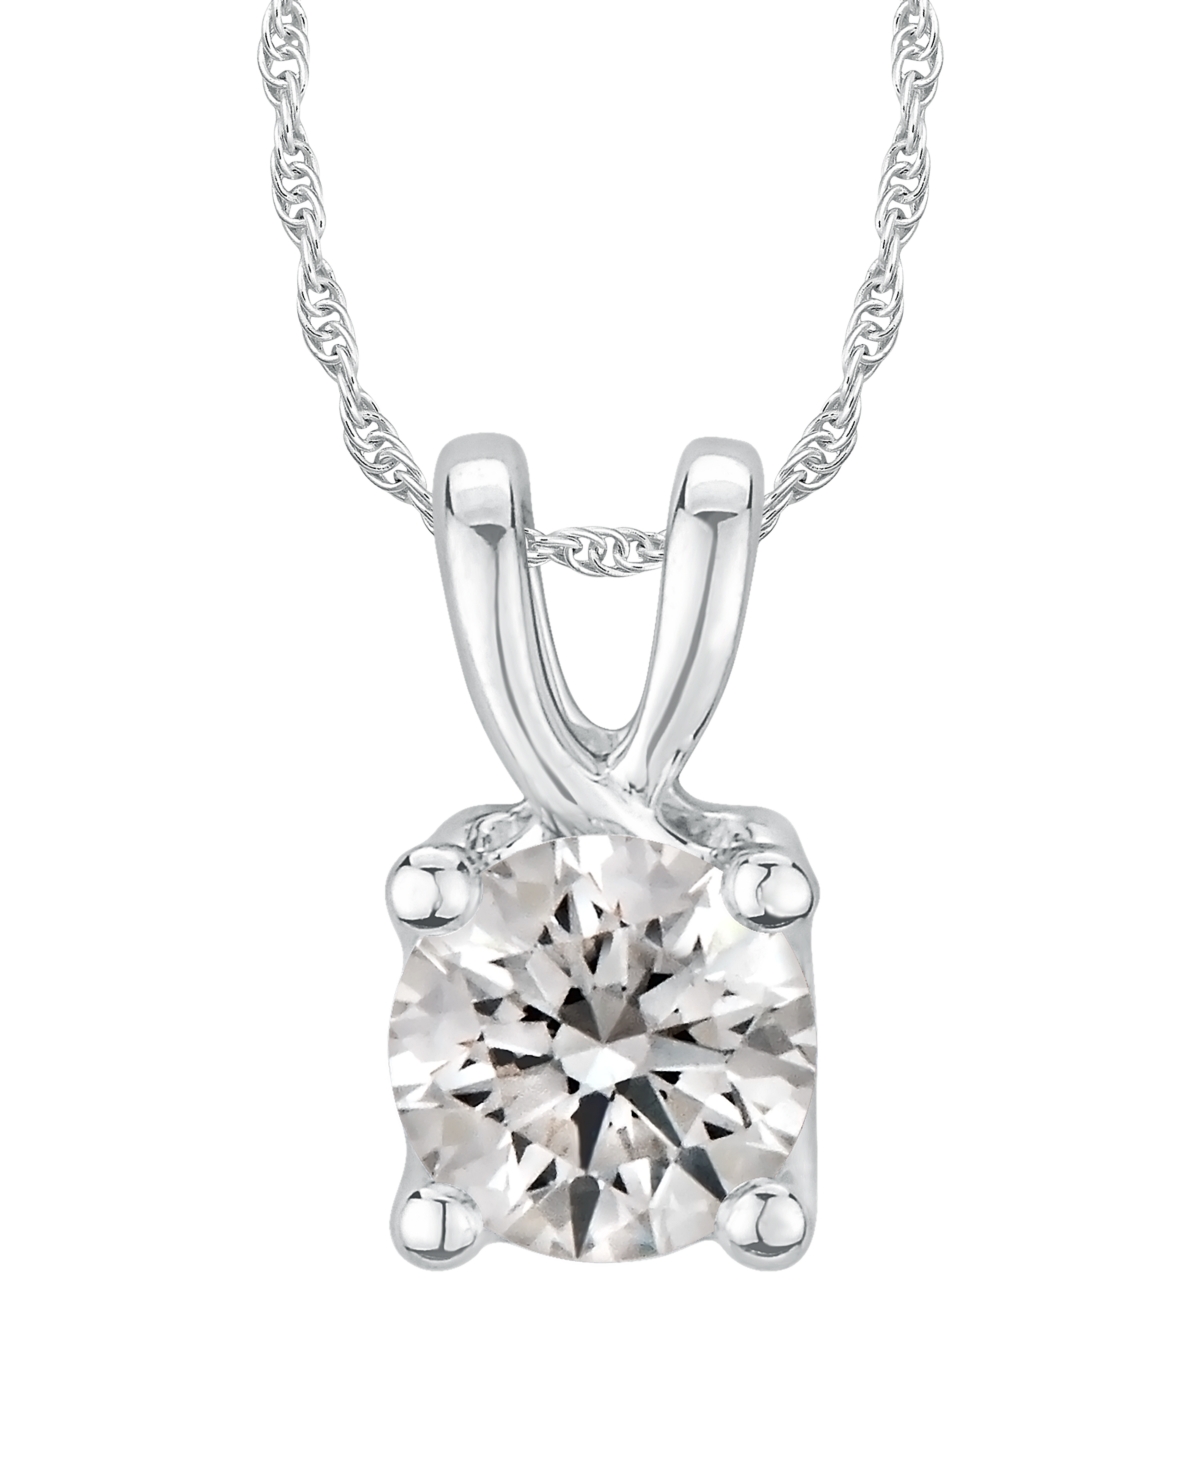 Gia Certified Diamonds Gia Certified Diamond Solitaire 18" Pendant Necklace (1 1/2 ct. t.w.) in 14K White Gold